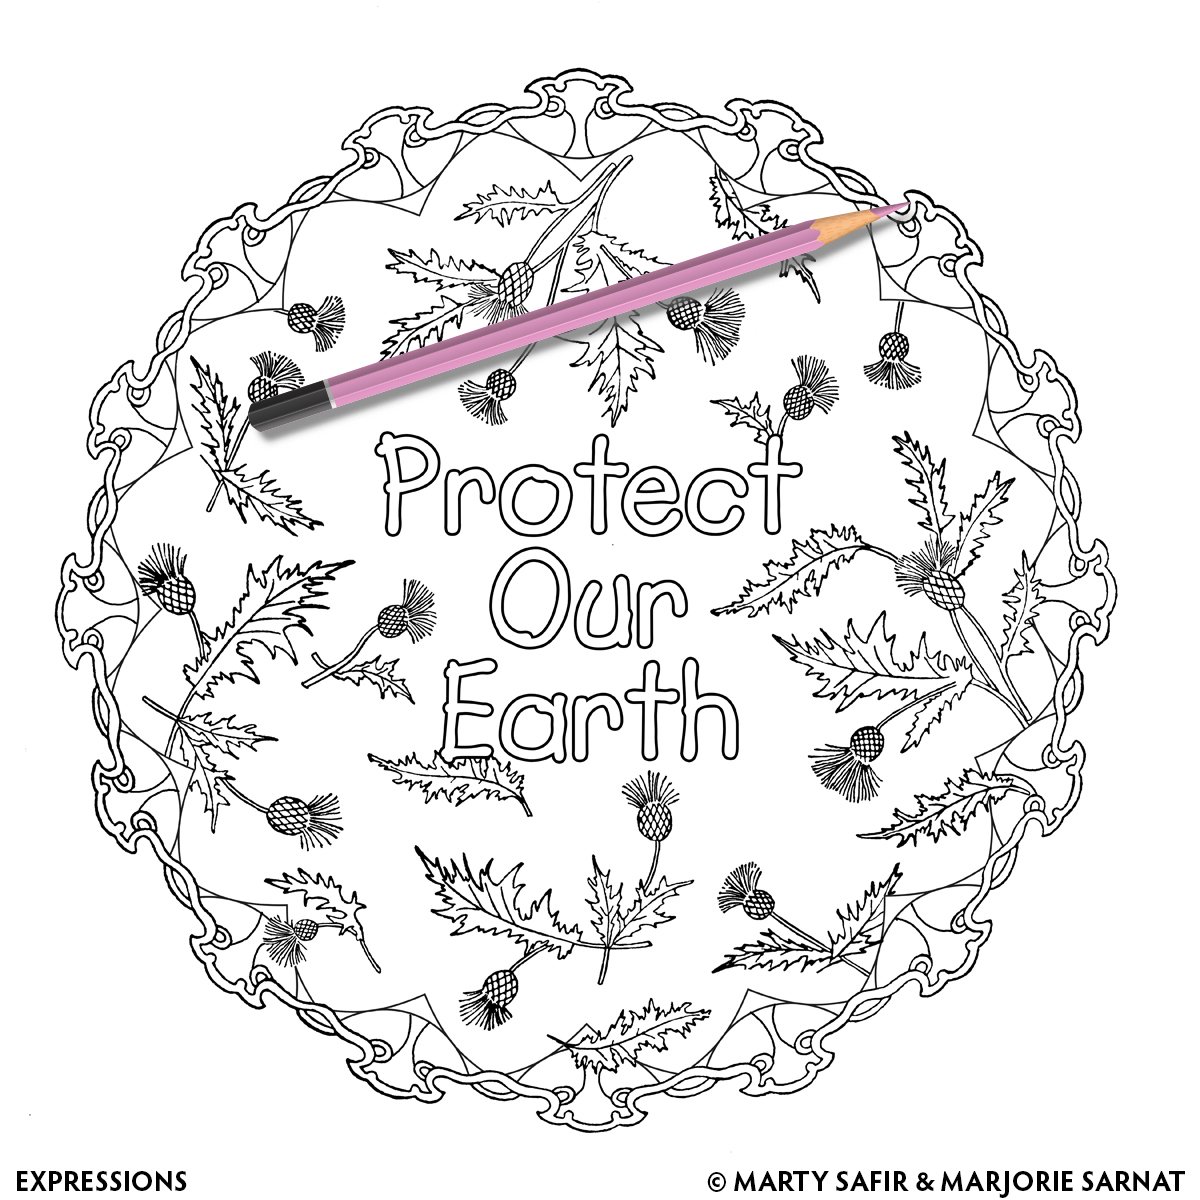 protect_our_earth_M-SARNAT.jpg